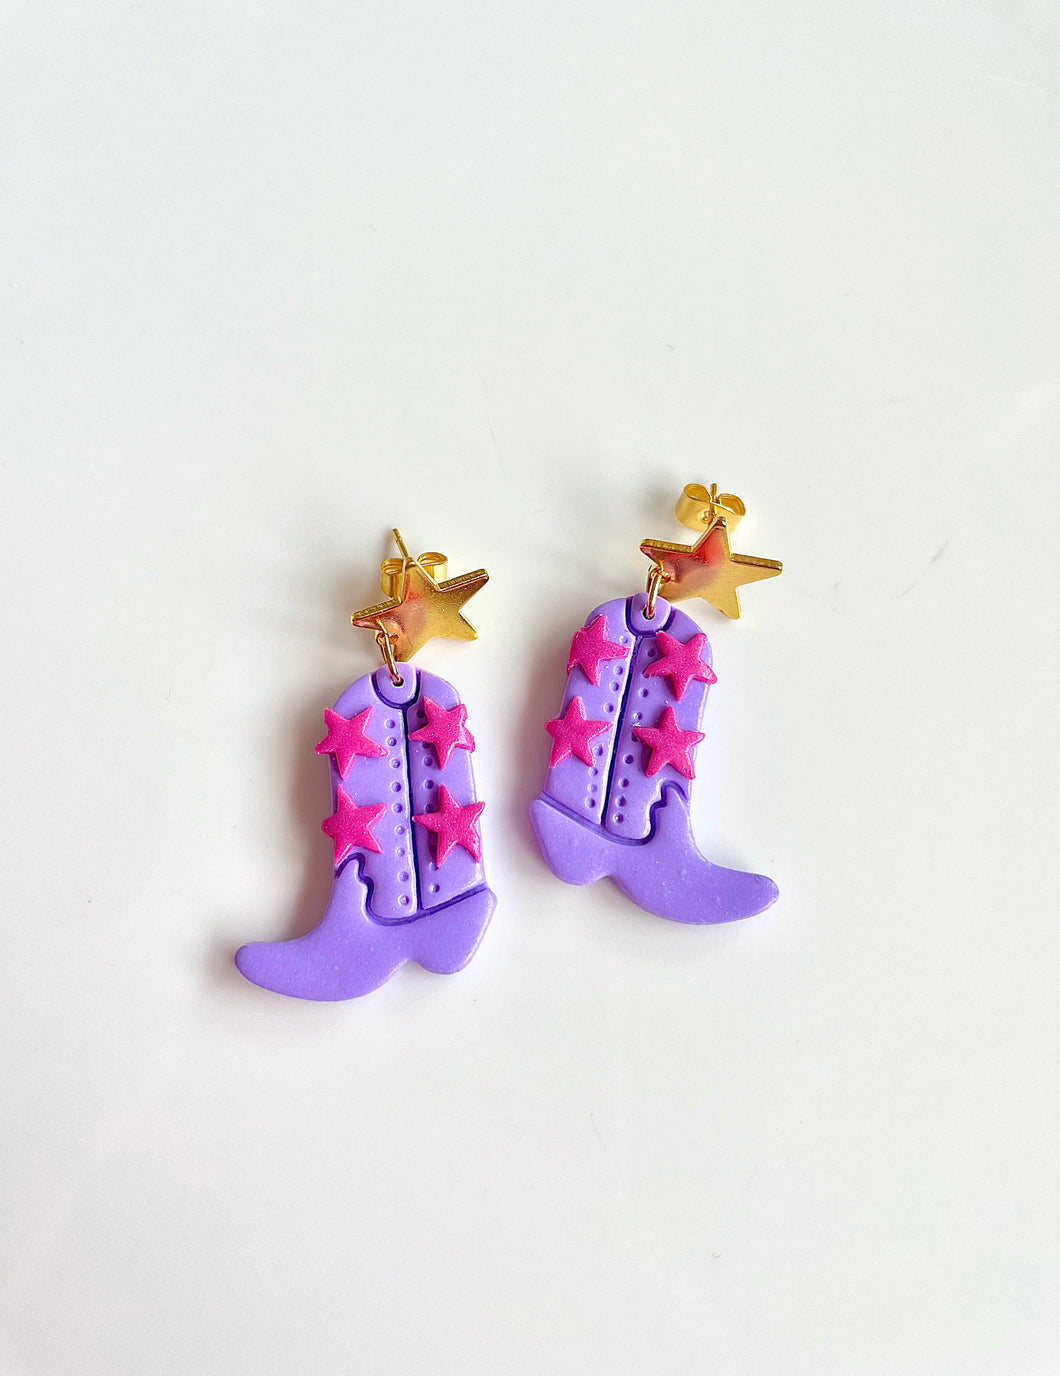 The Dolly earrings (Barbie's version)